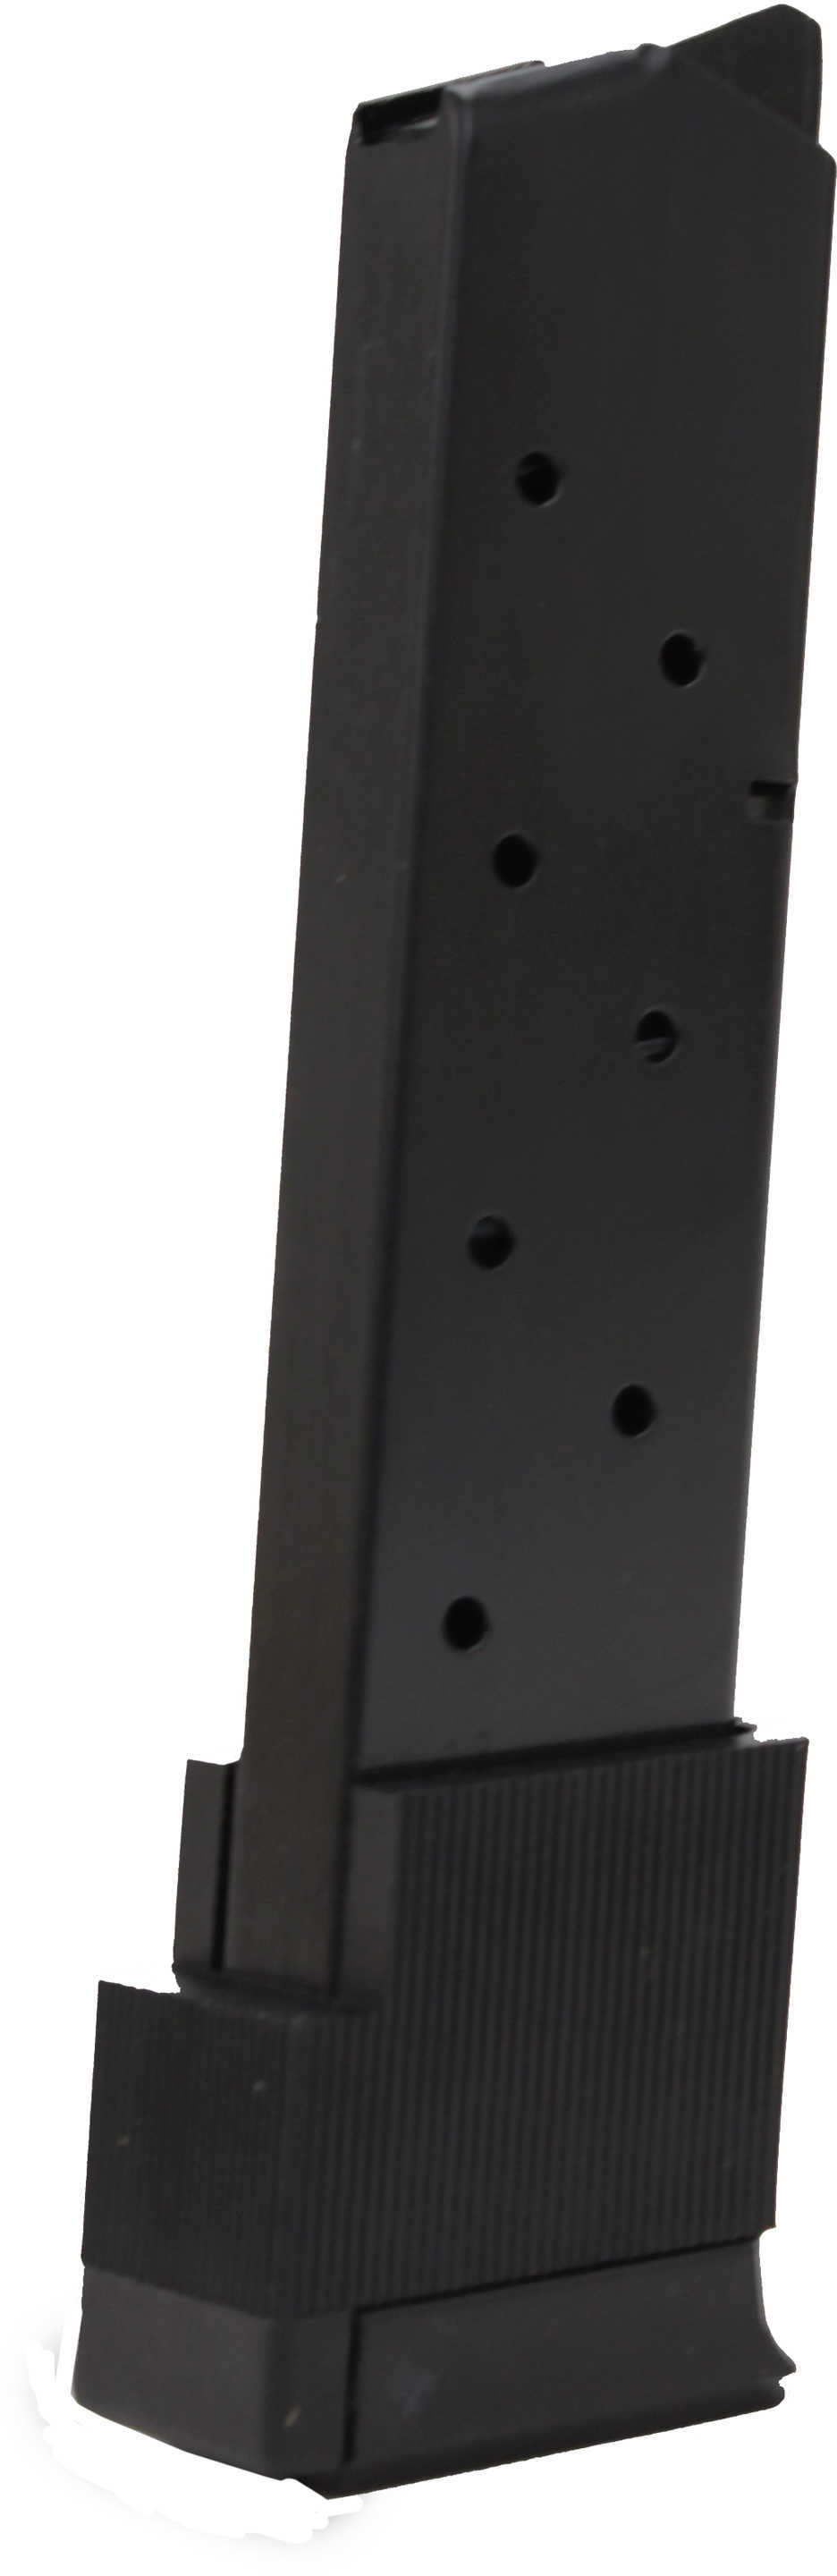 ProMag RUG04 Ruger P-Series P90/97 45 ACP 10 Round Steel Blued Finish